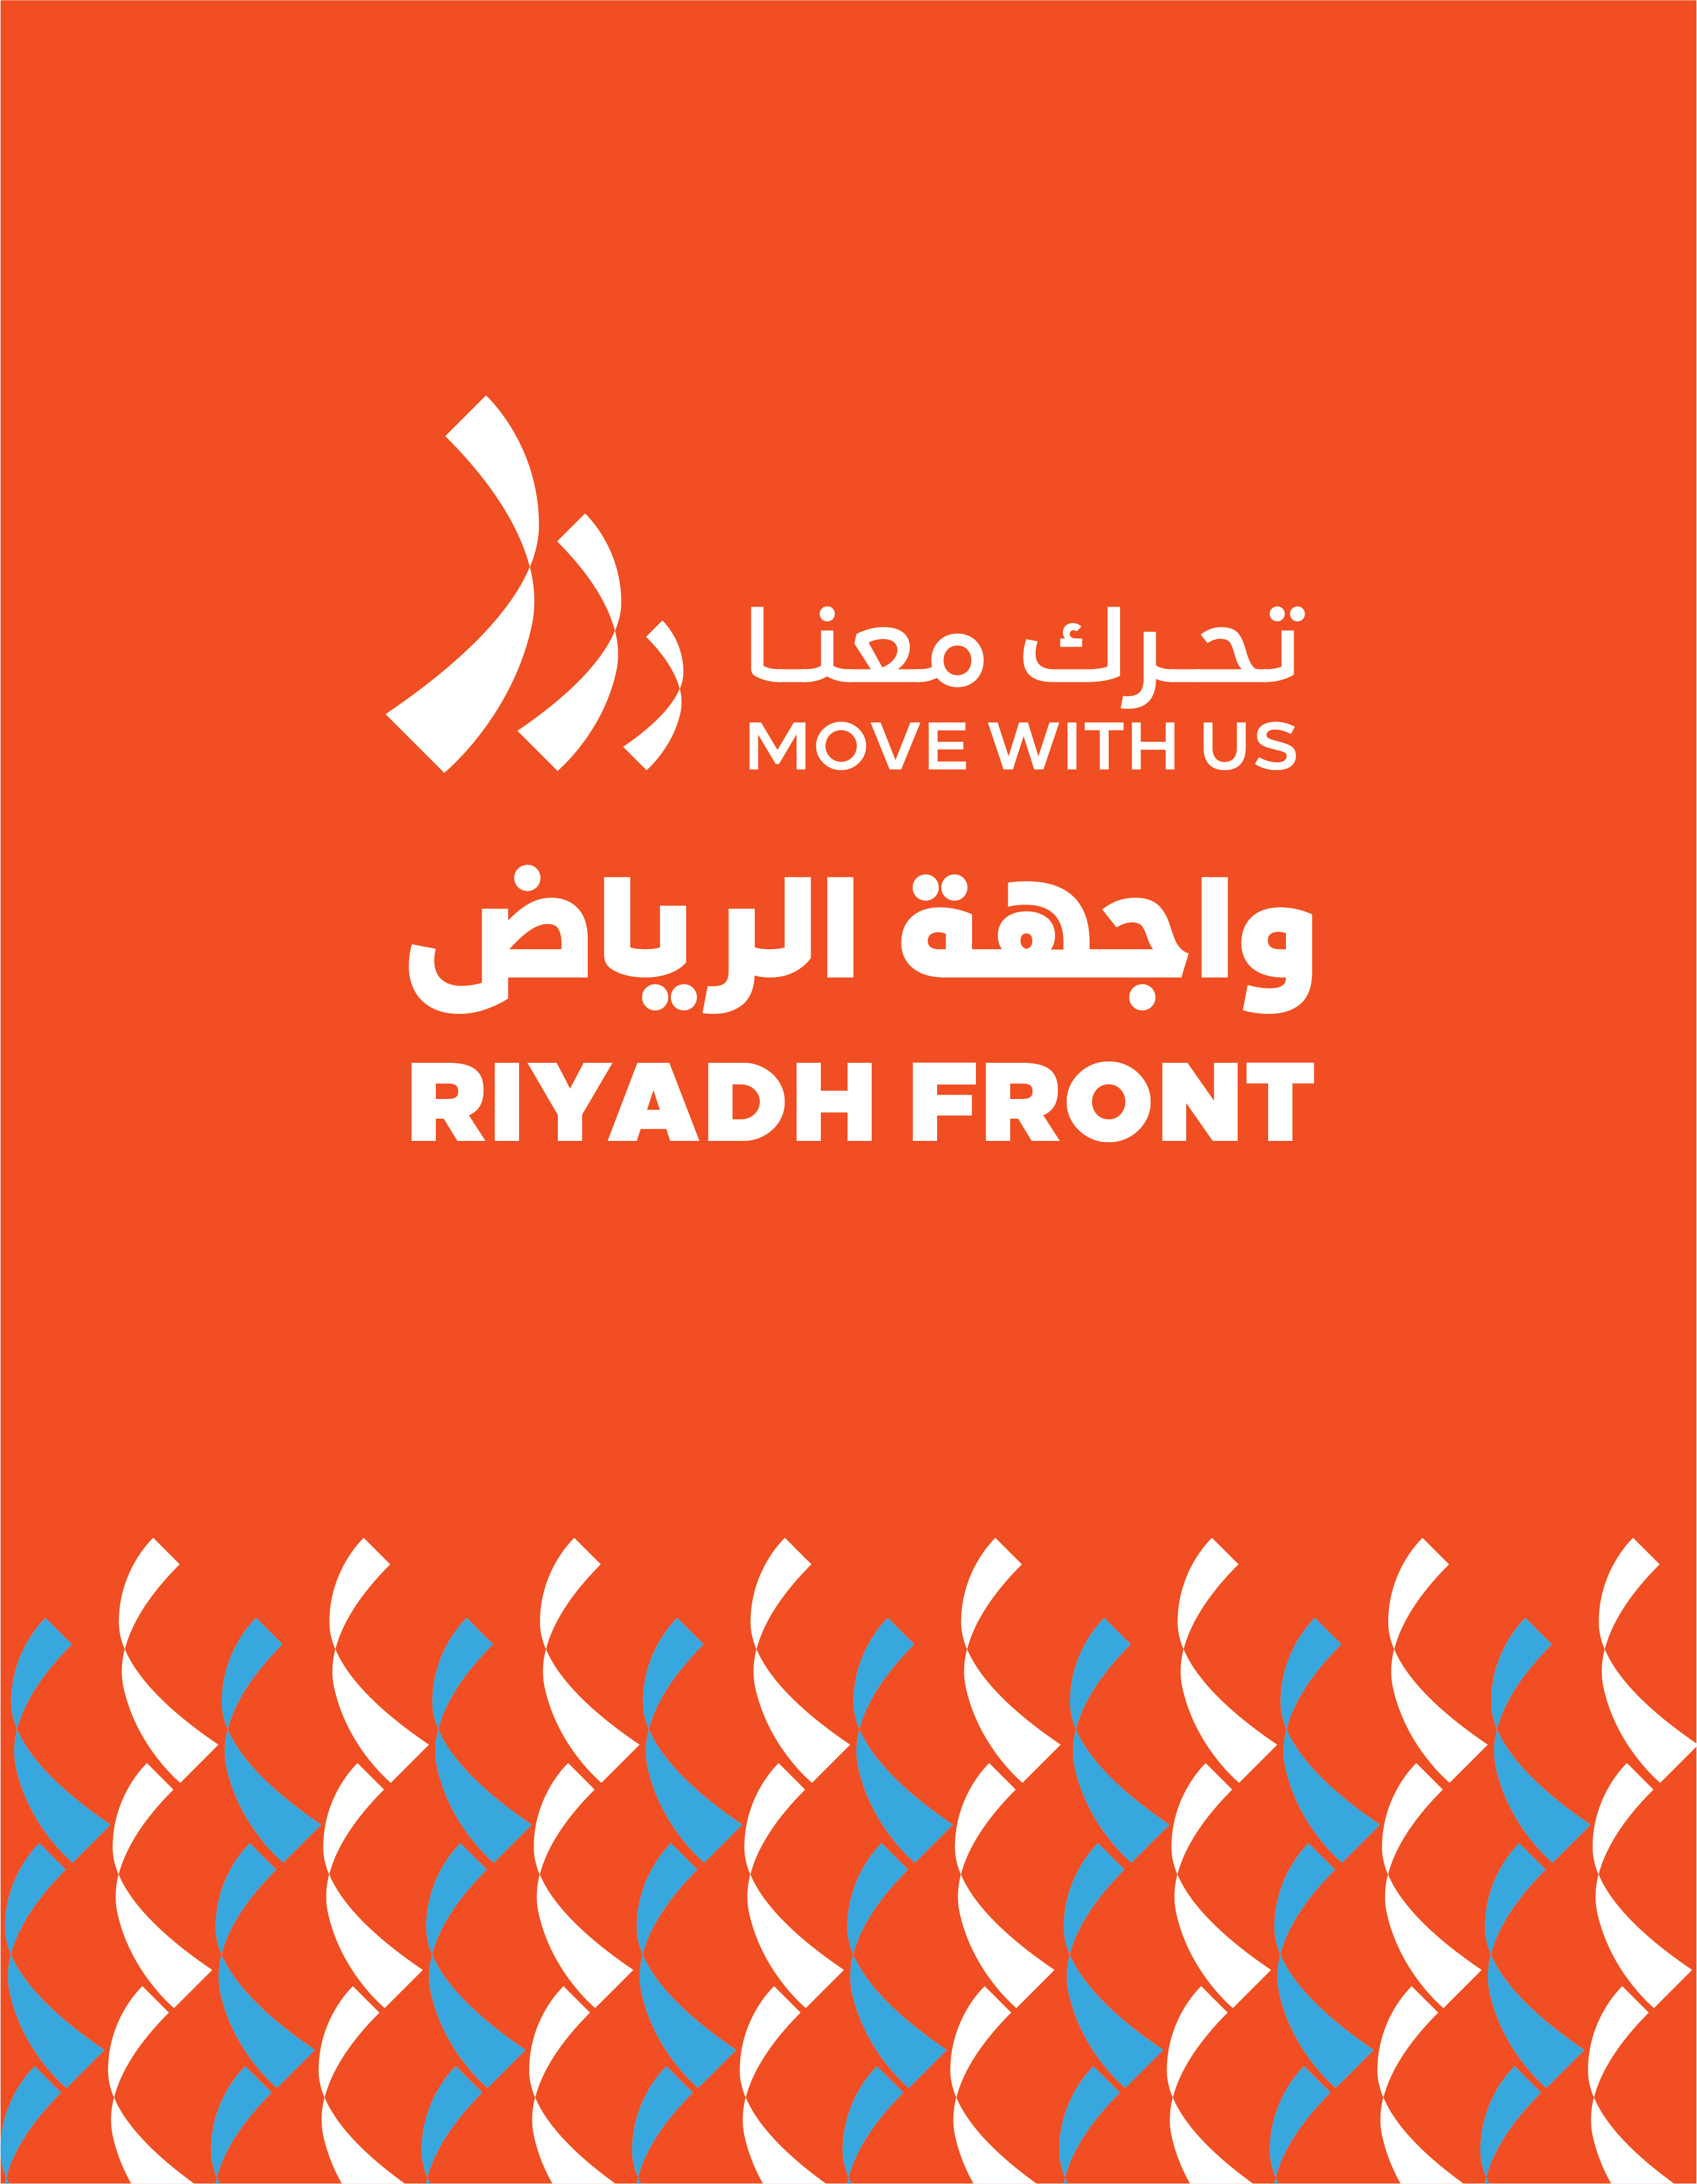 move-with-us-riyadh-front-event-poster